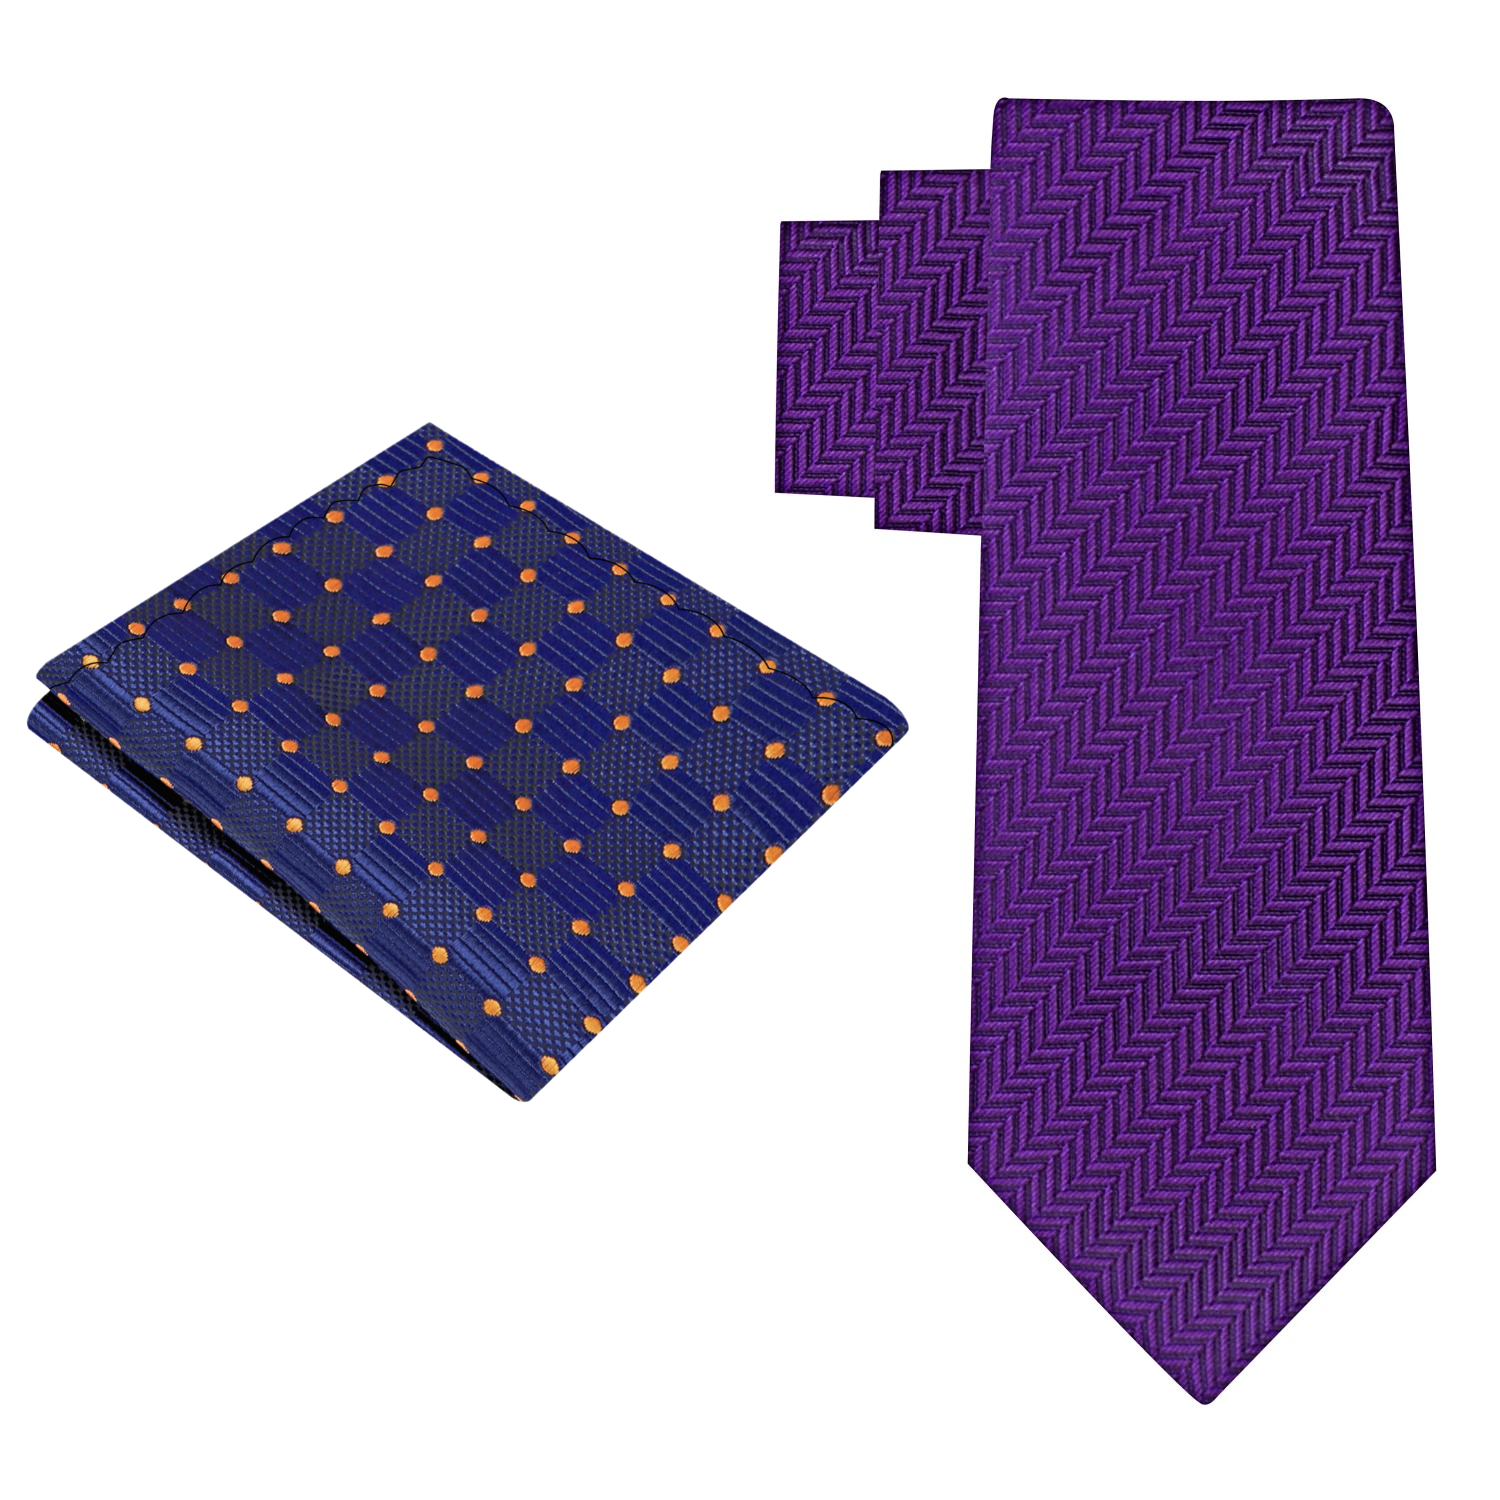 View 2: Purple Necktie with Accenting Blue and Gold Square